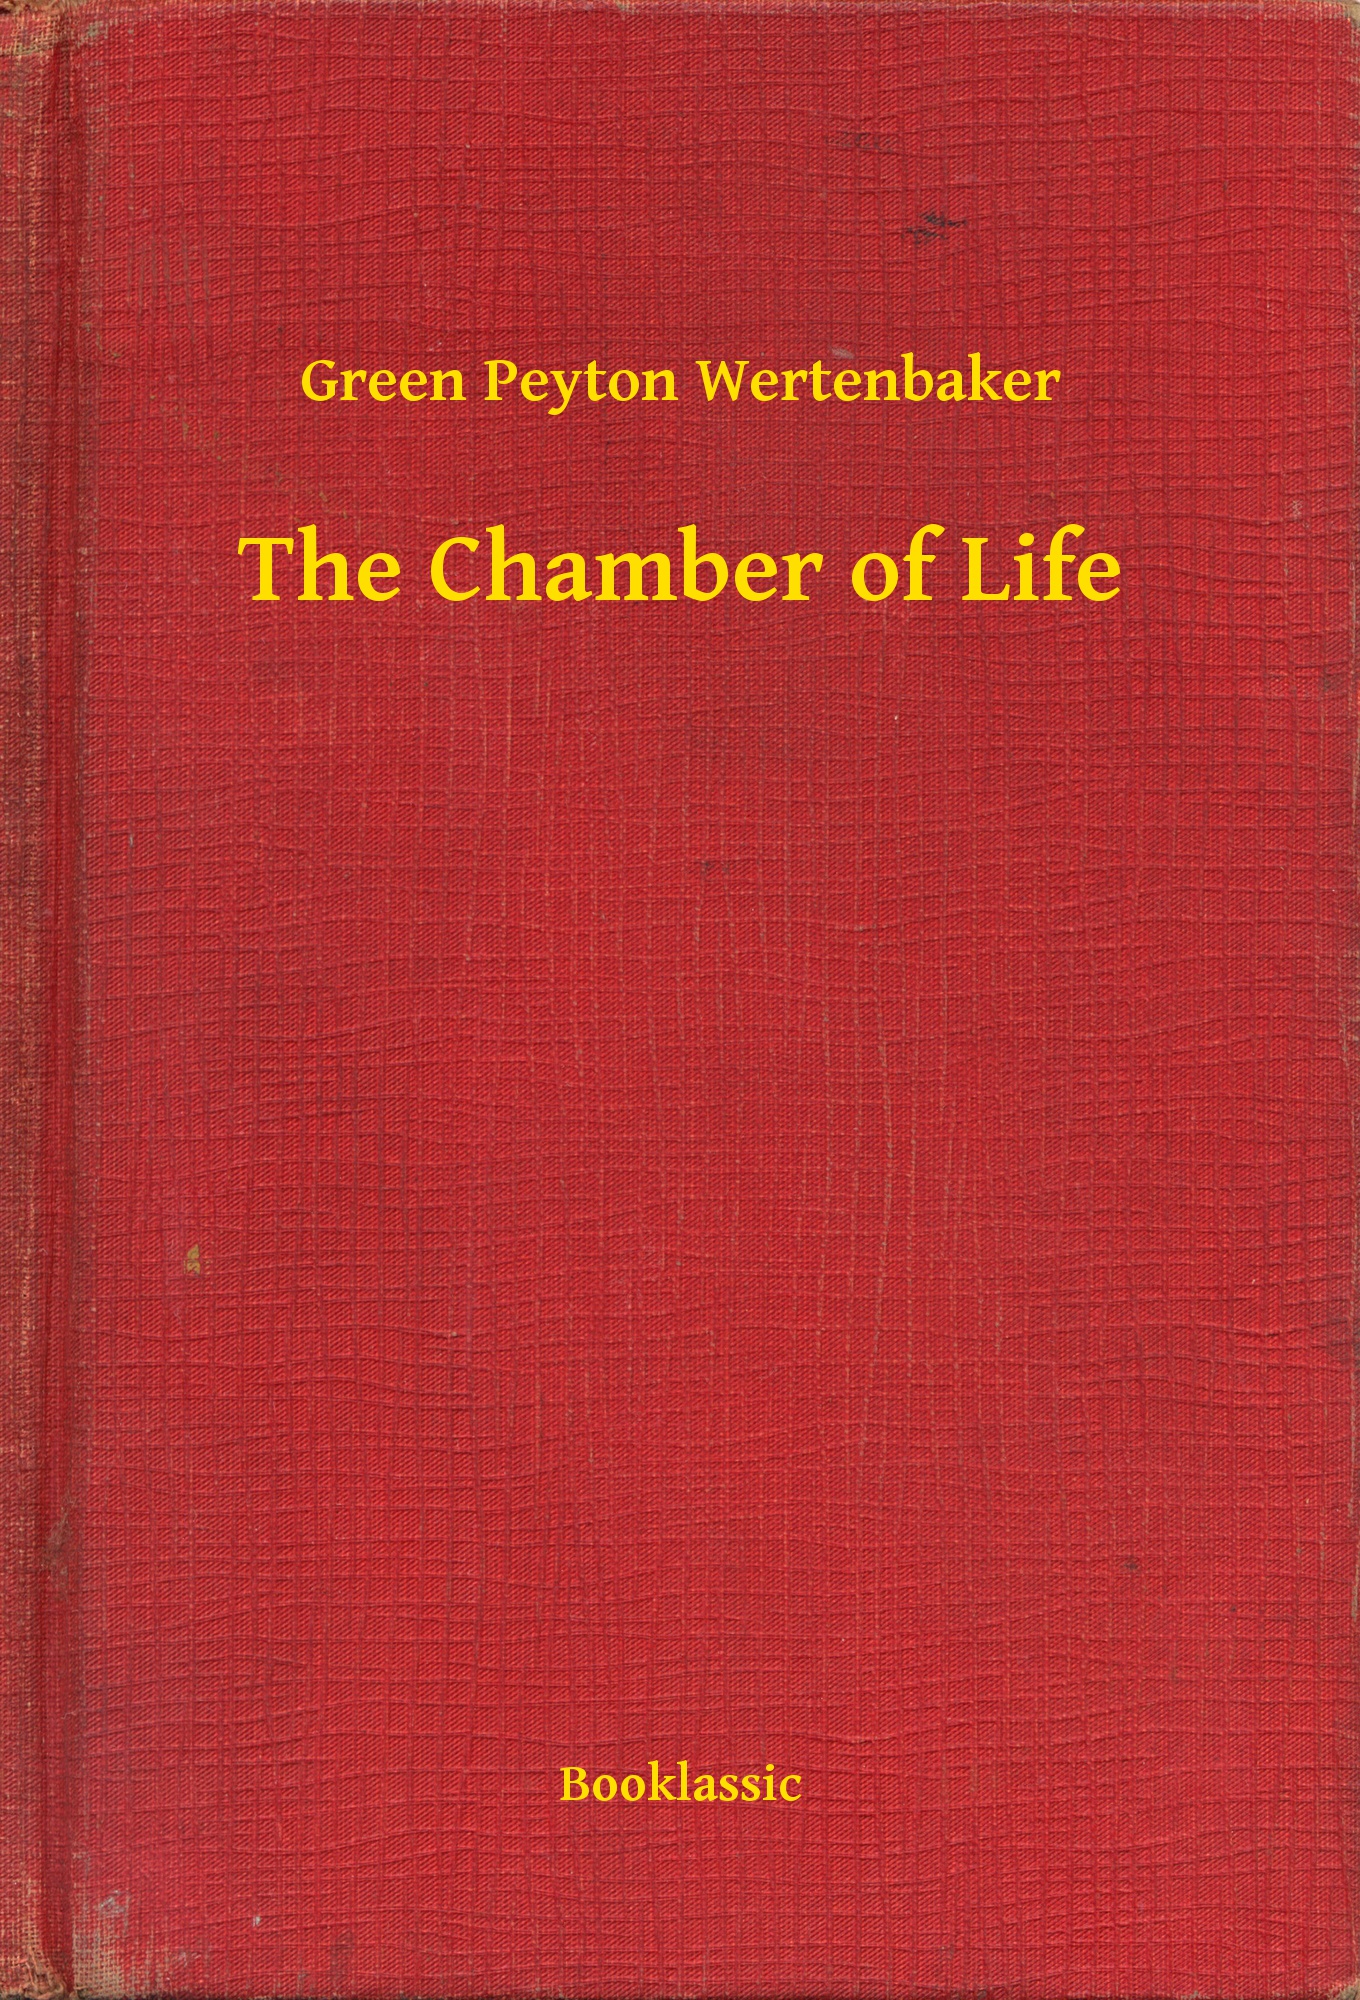 The Chamber of Life